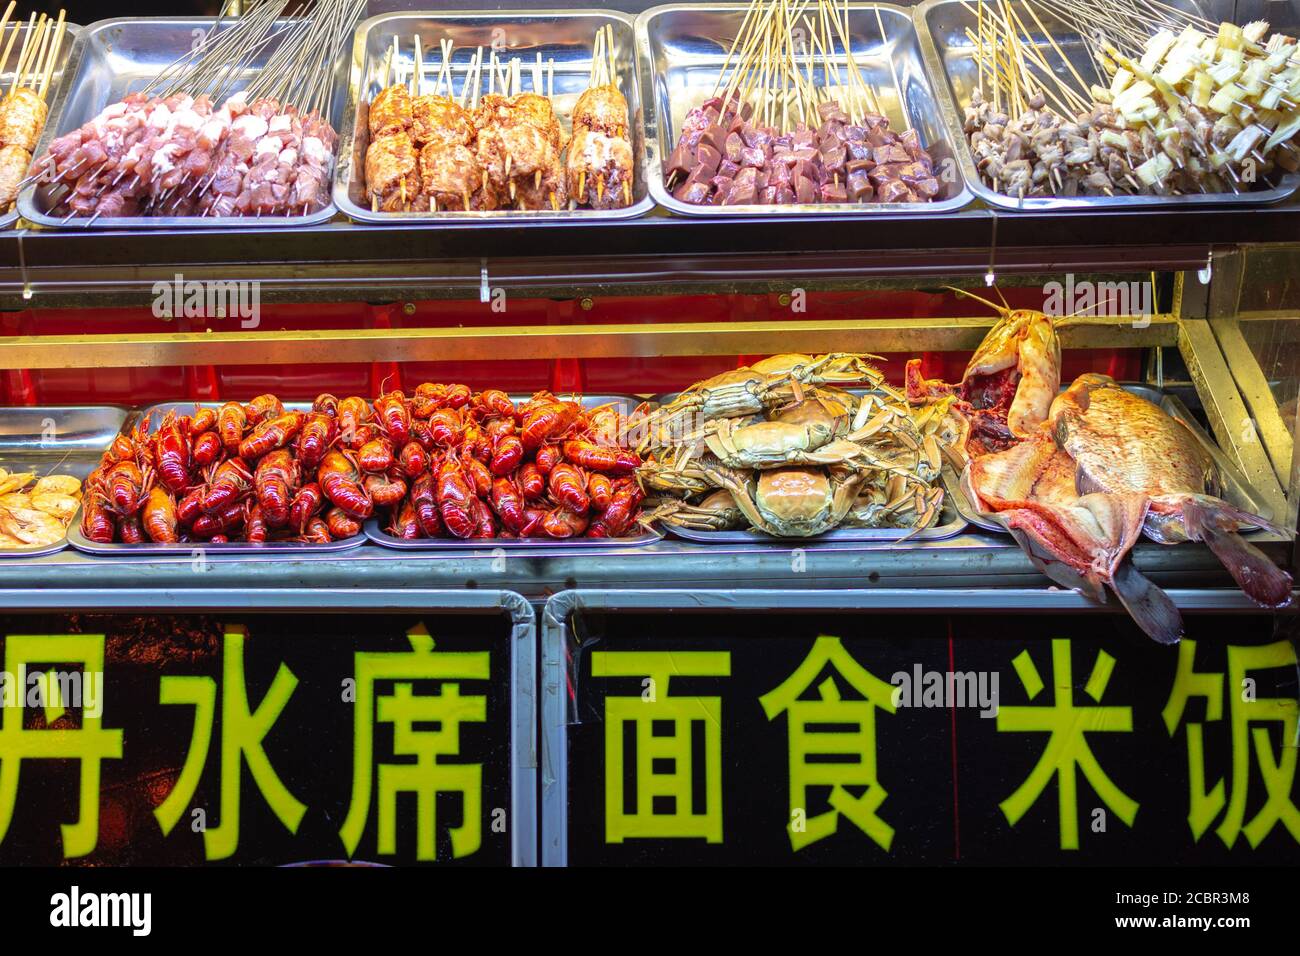 Luoyang, Henan Province / China - January 3, 2016: Street market food stall in Luoyang Old City Stock Photo